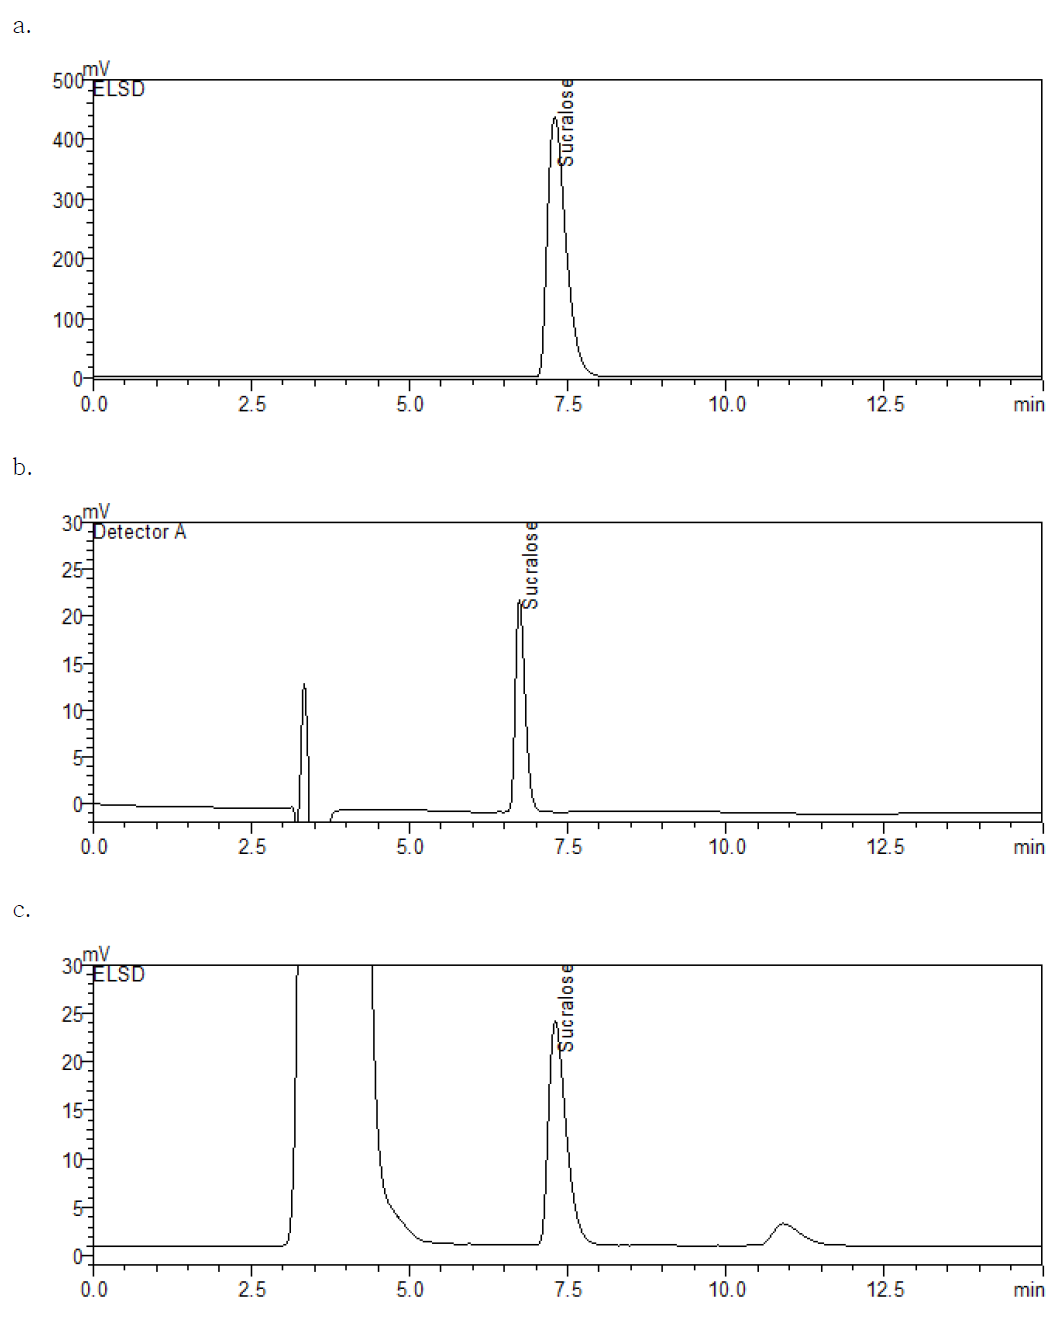 HPLC chromatograms of standard solution and livestock processed foods piked with sucralose